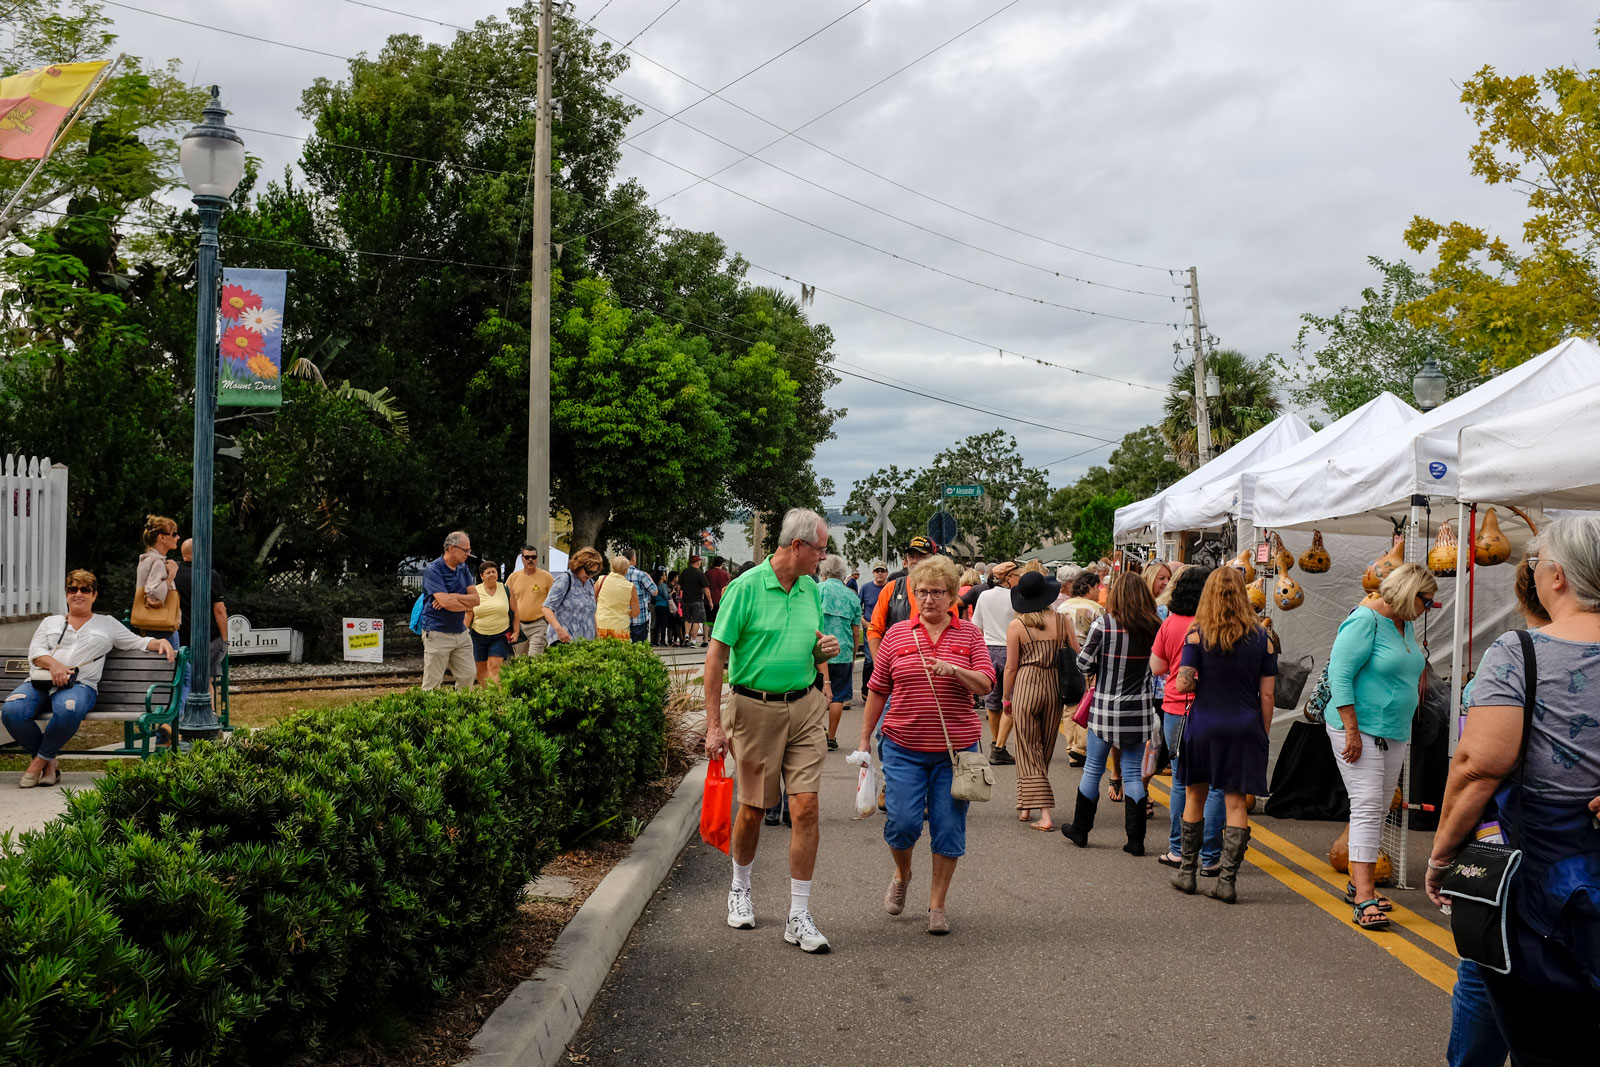 A crowd gathers at the Mount Dora Craft Festival